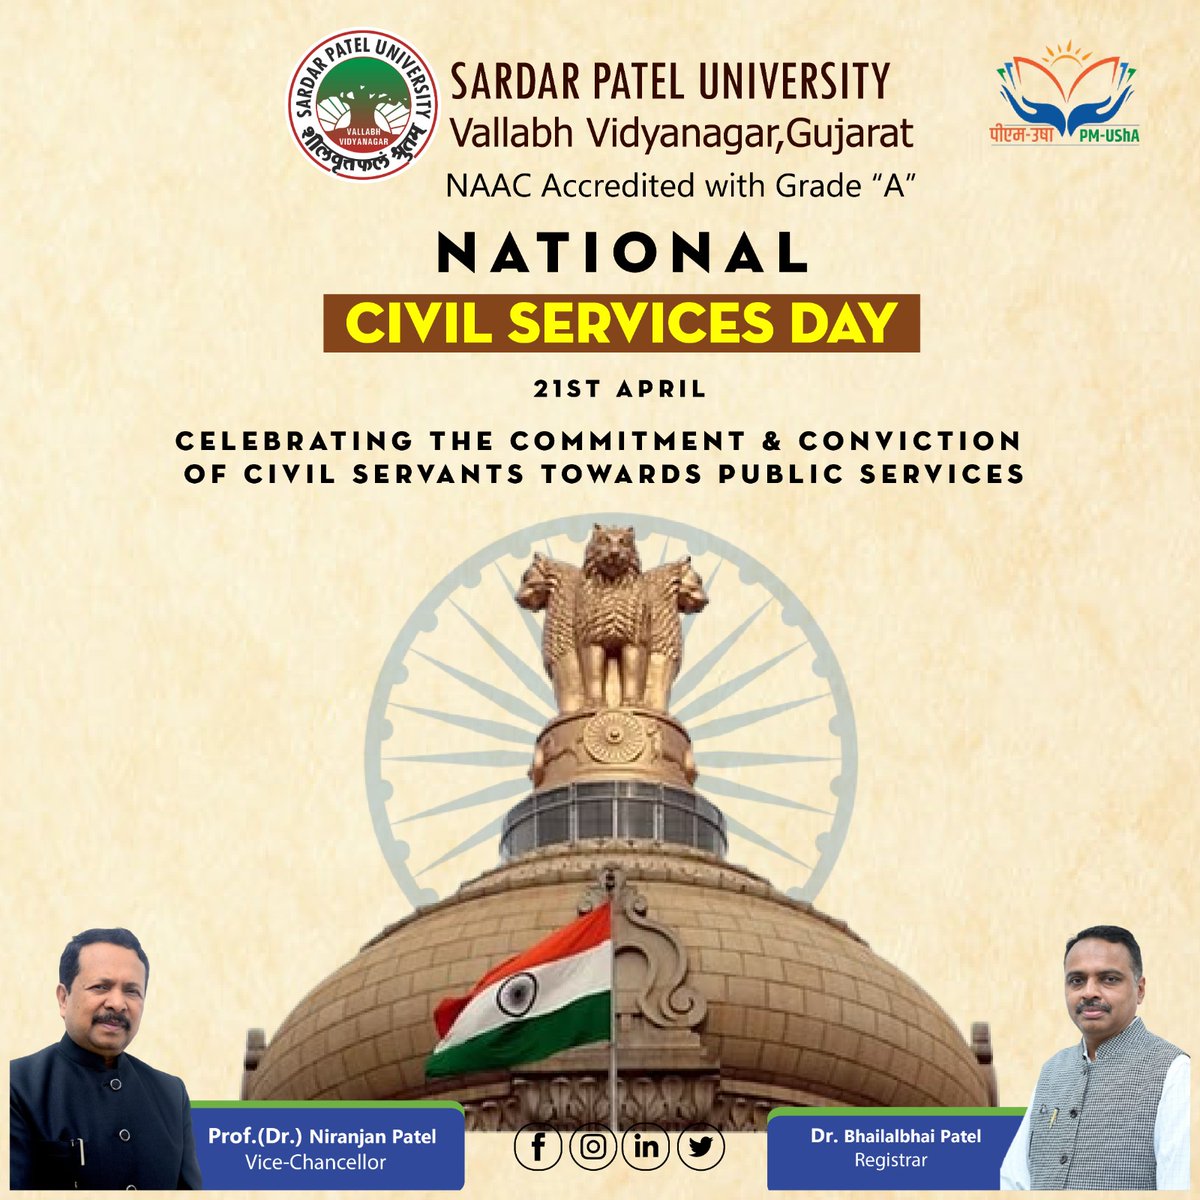 As we celebrate National Civil Services Day, it is time to remember the stellar role played by our civil servants in nation-building. Best wishes to all civil servants on the occasion of Civil Service Day! #NationalCivilServicesDay #SPU #VVnagar #SPU2024 #SPUinfo